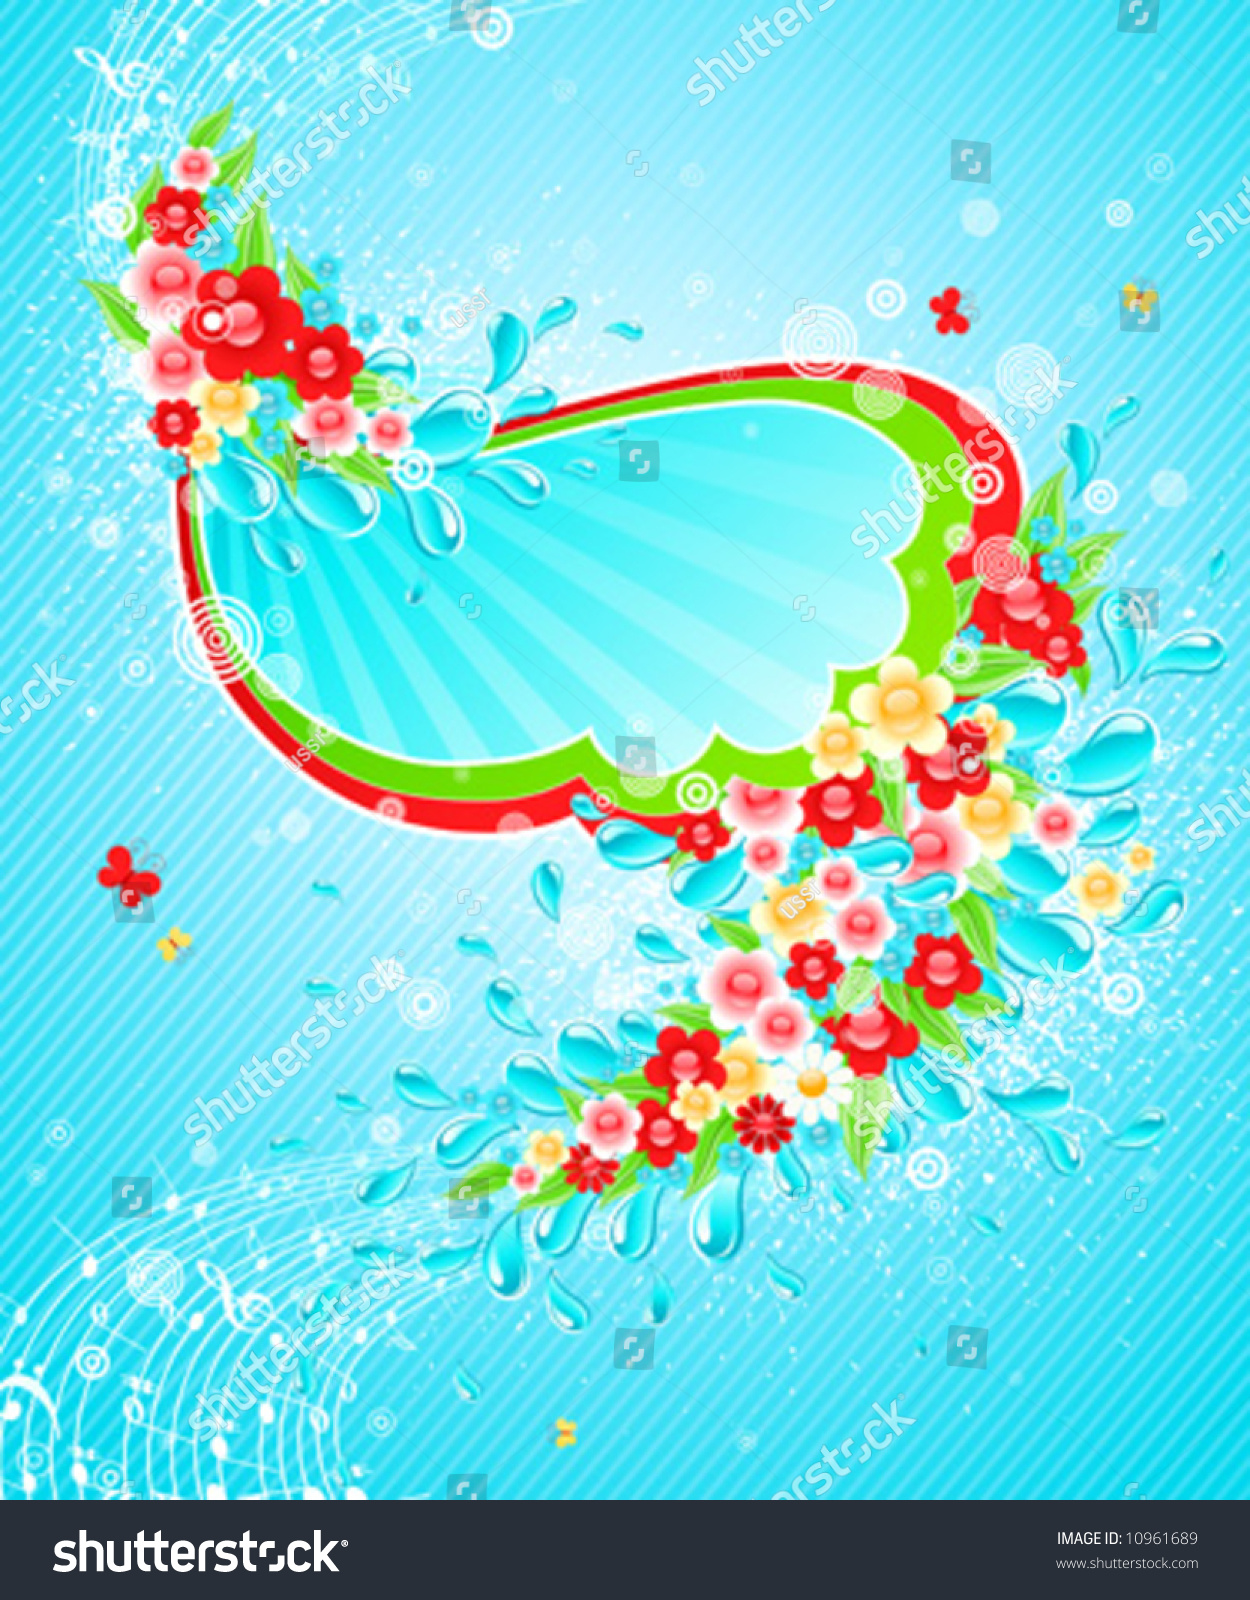 Design With Drops And Flowers. Vector Illustration. - 10961689